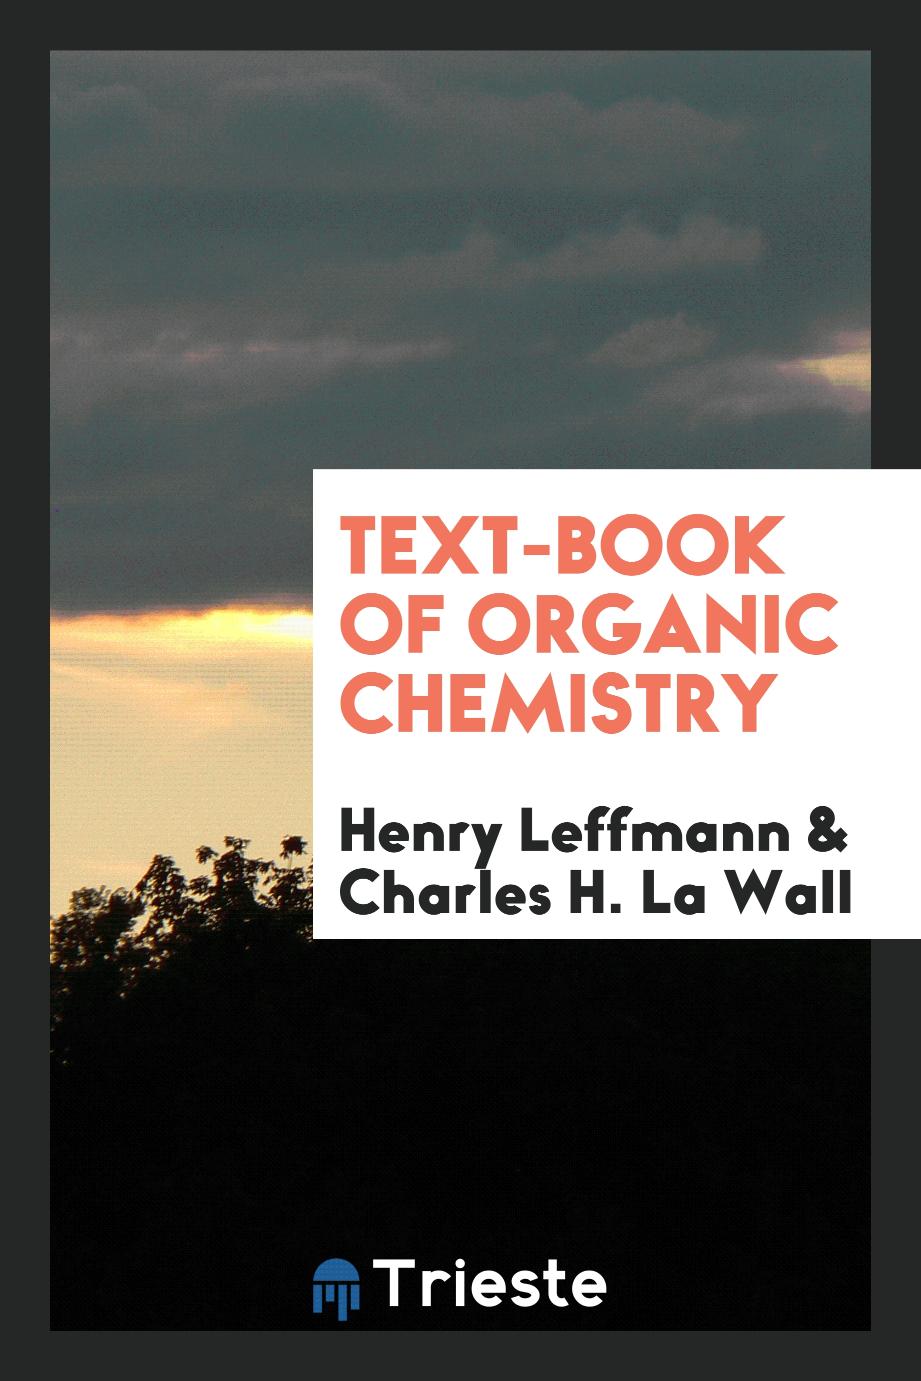 Text-book of organic chemistry